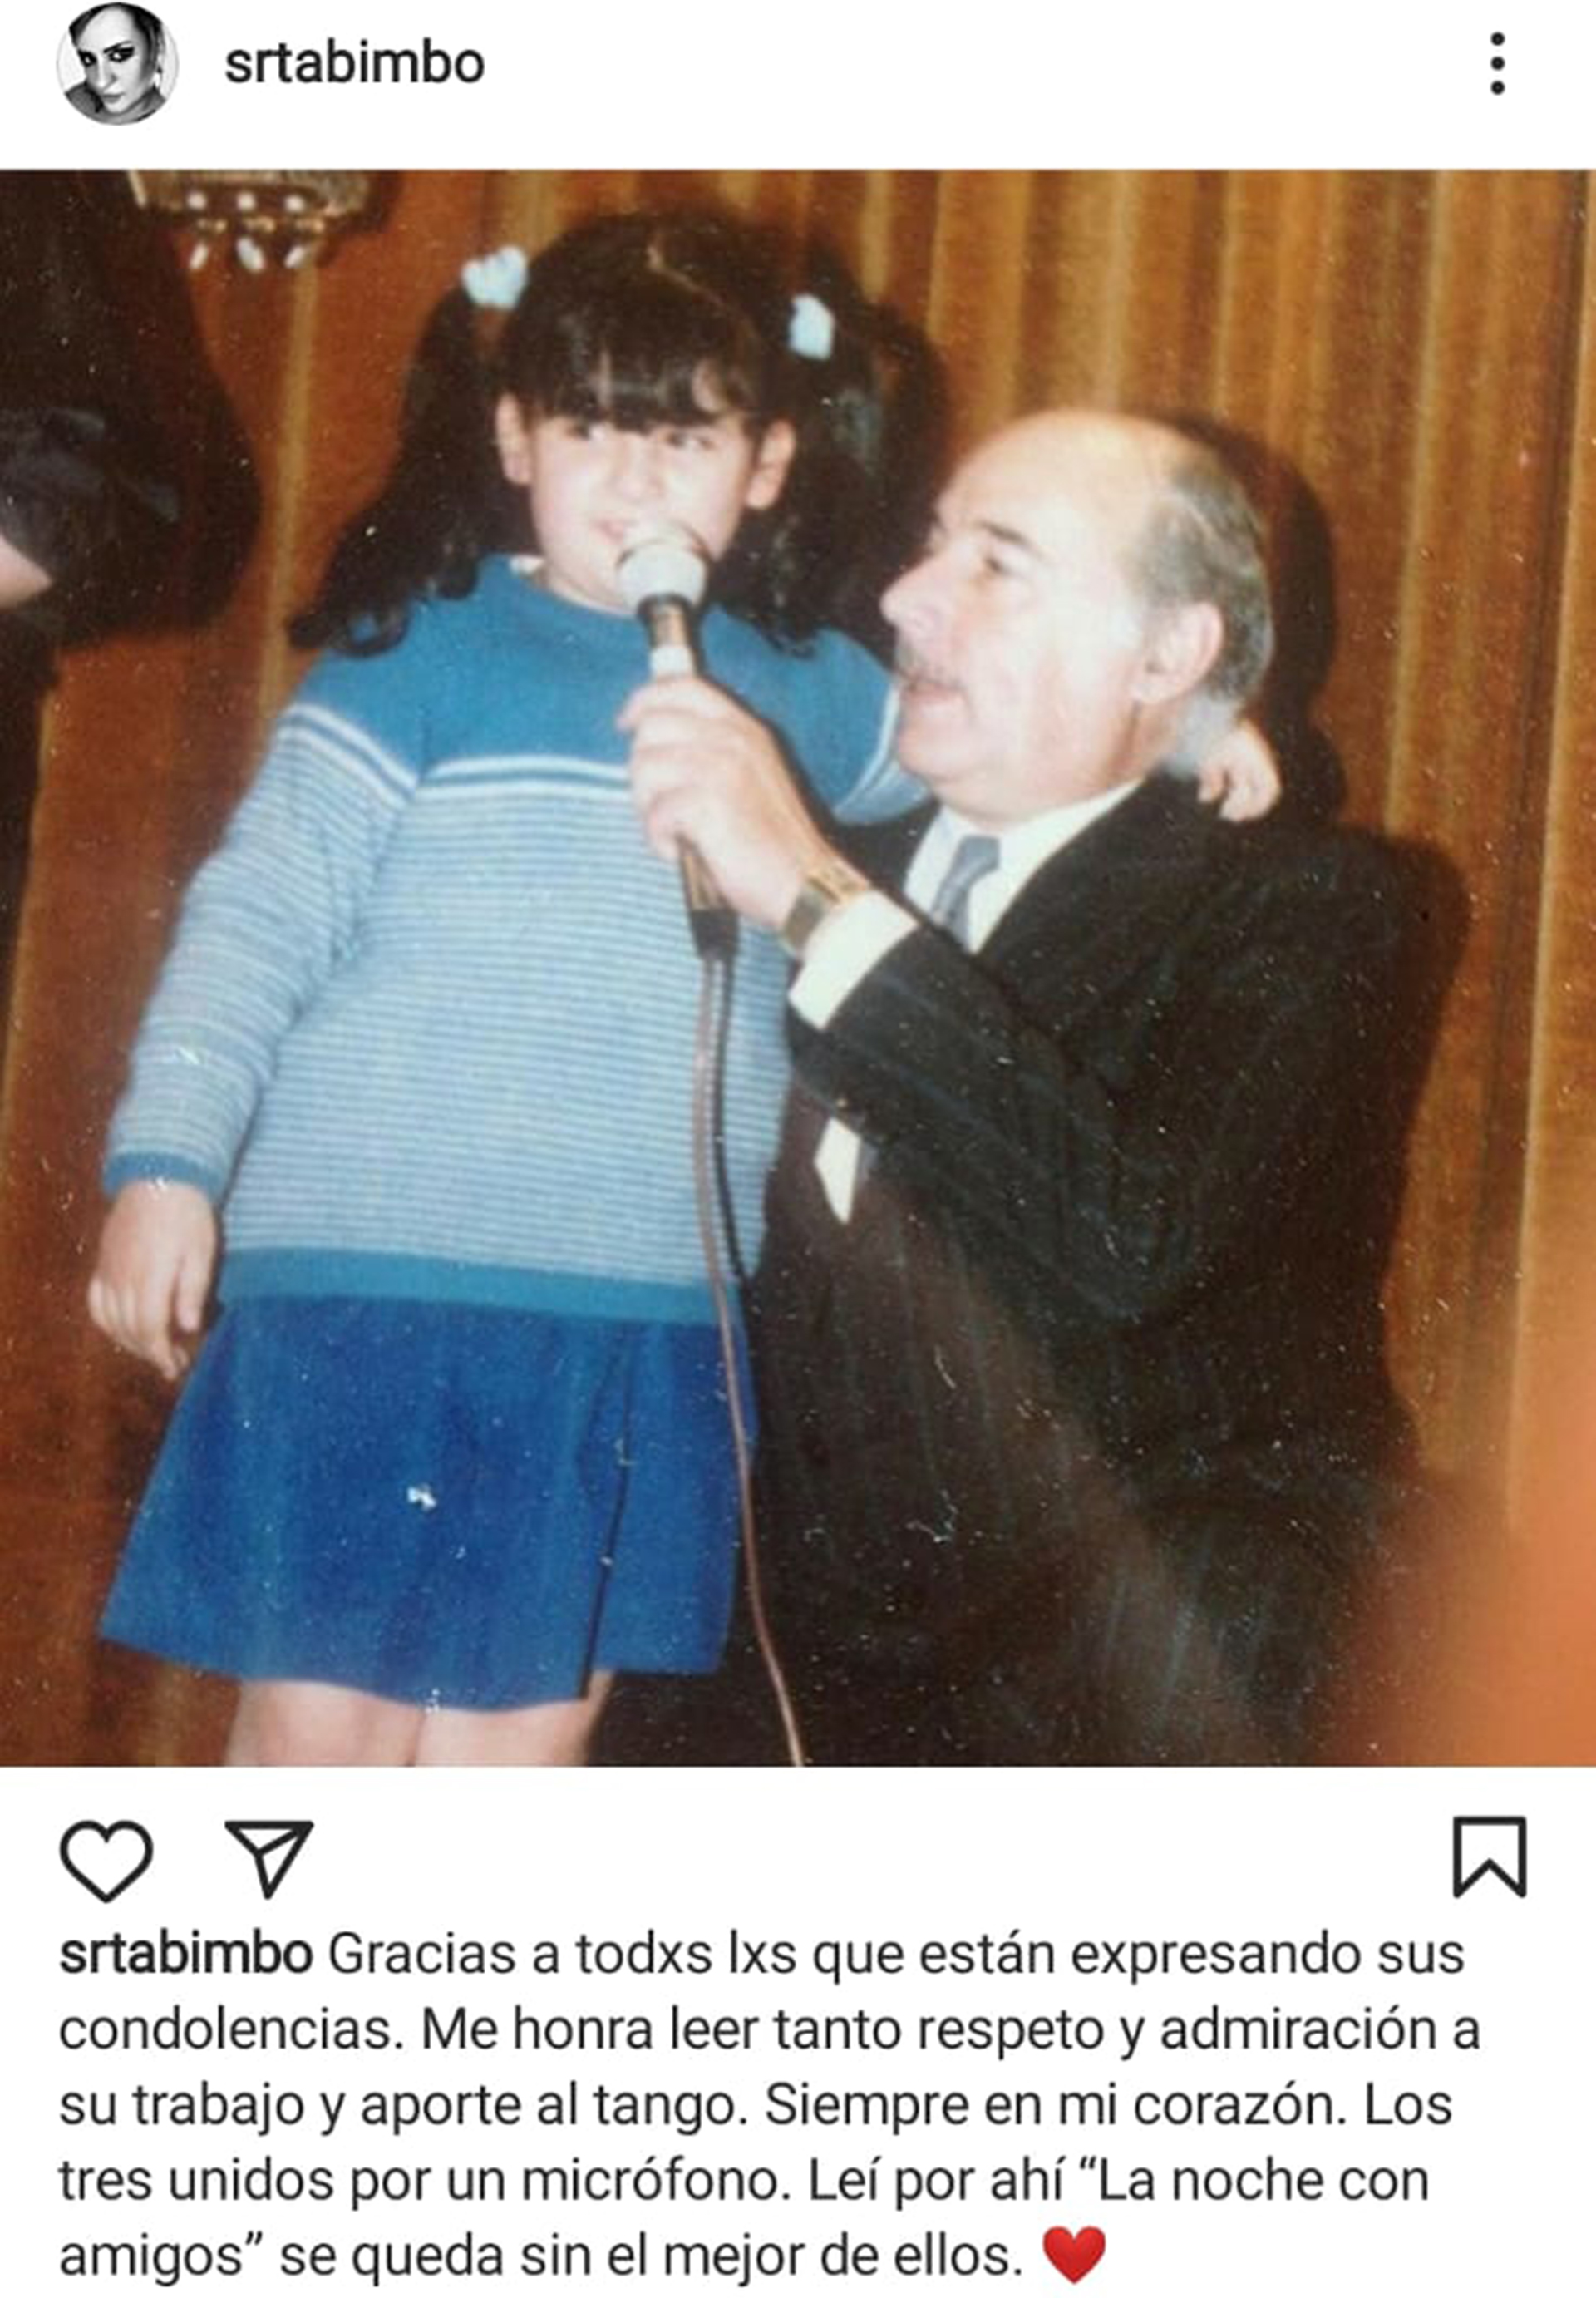 This is how he said goodbye to his father, Lionel Godoy, journalist and radio host of "The evening with friends" (@srtabimbo)